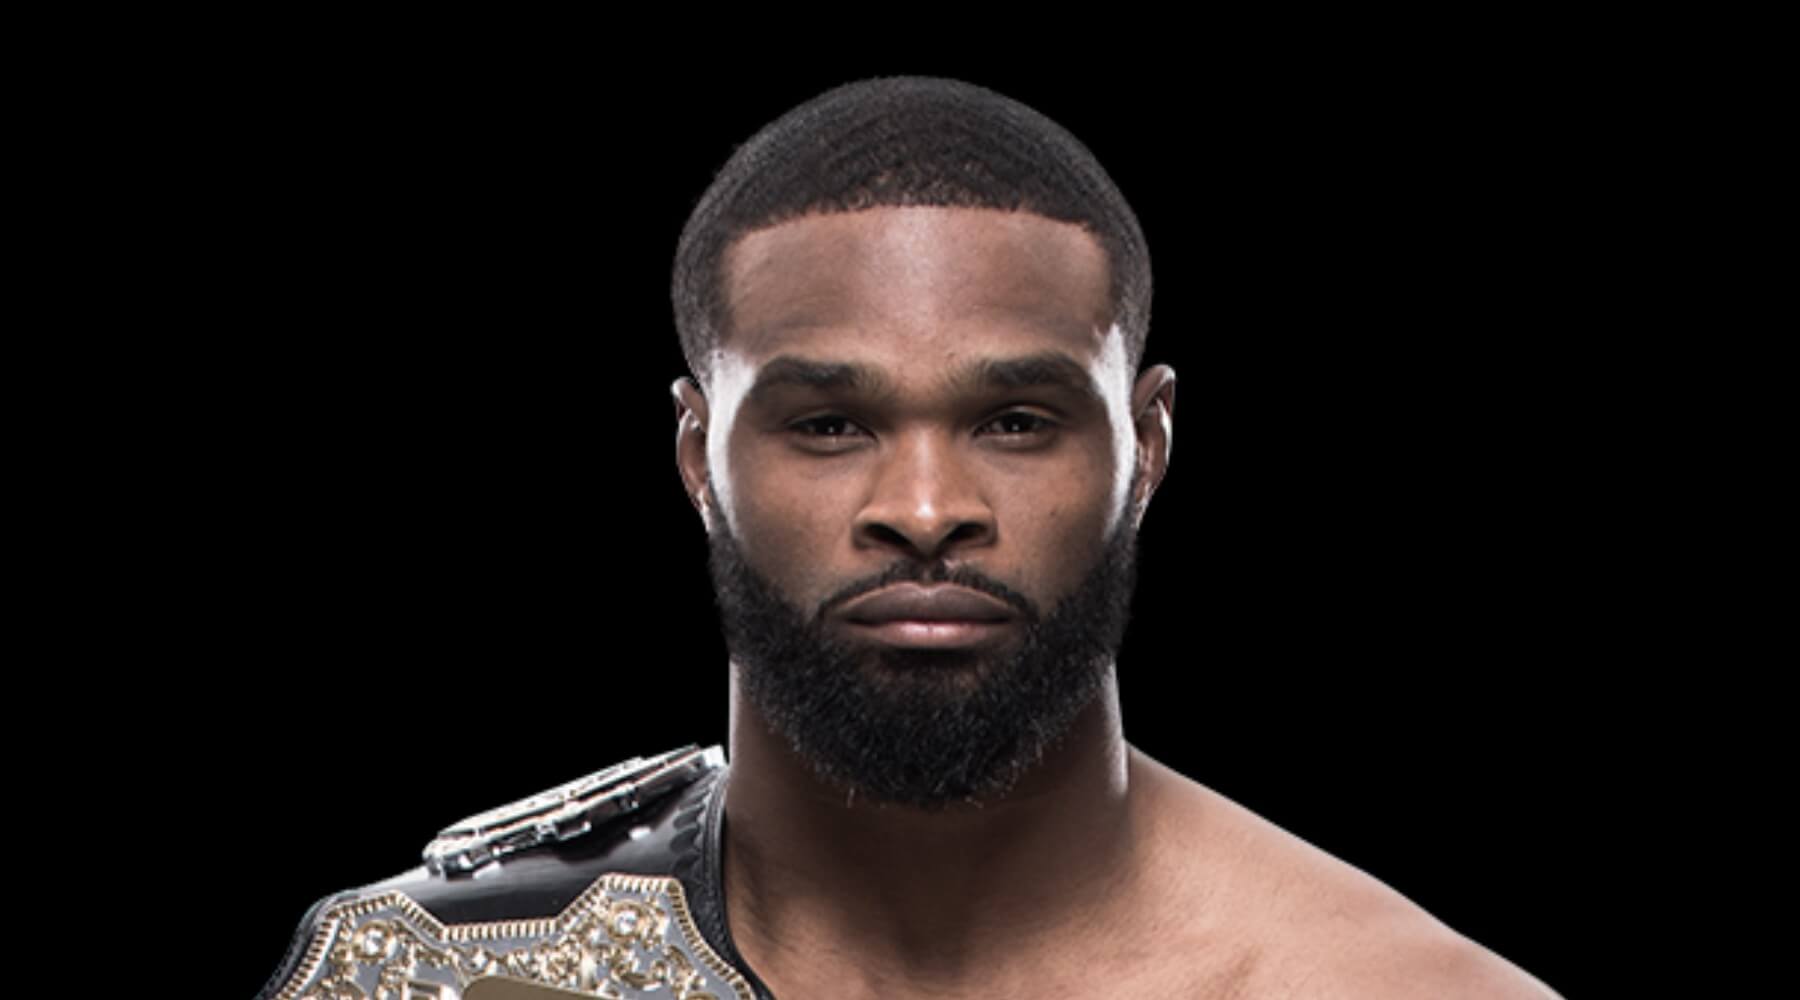 Overcome All Obstacles, ft. Tyron Woodley - MFCEO19